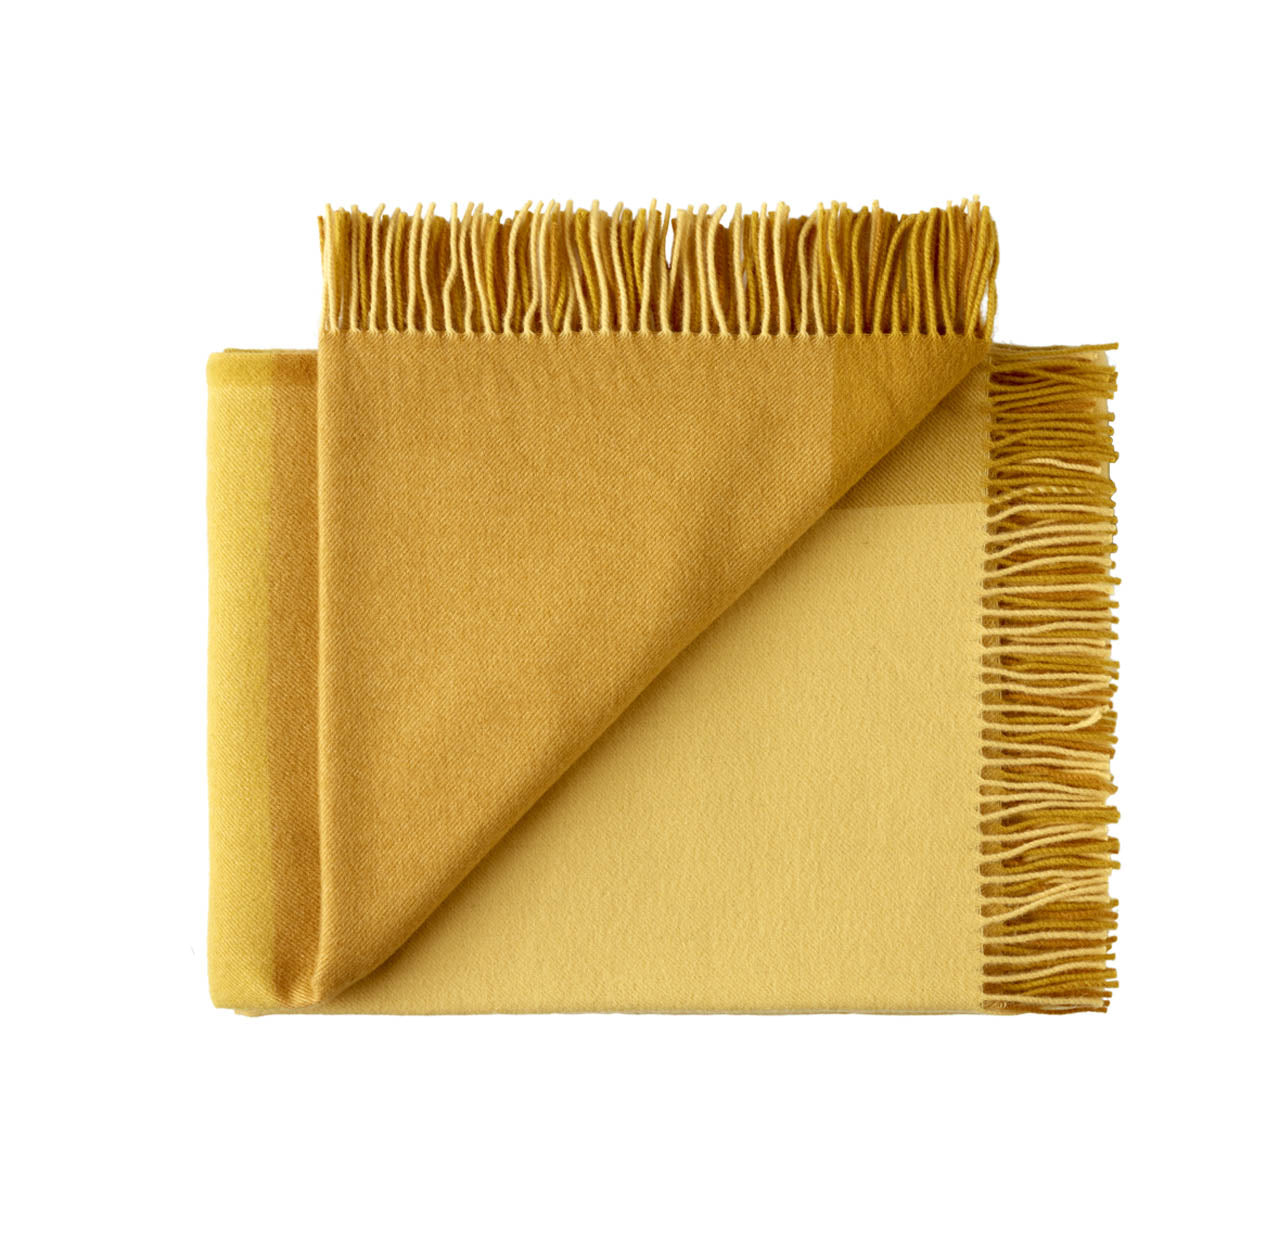 Wool Throw Roxburgh from Weave Home Amber yellow  colour block pattern. New Zealand